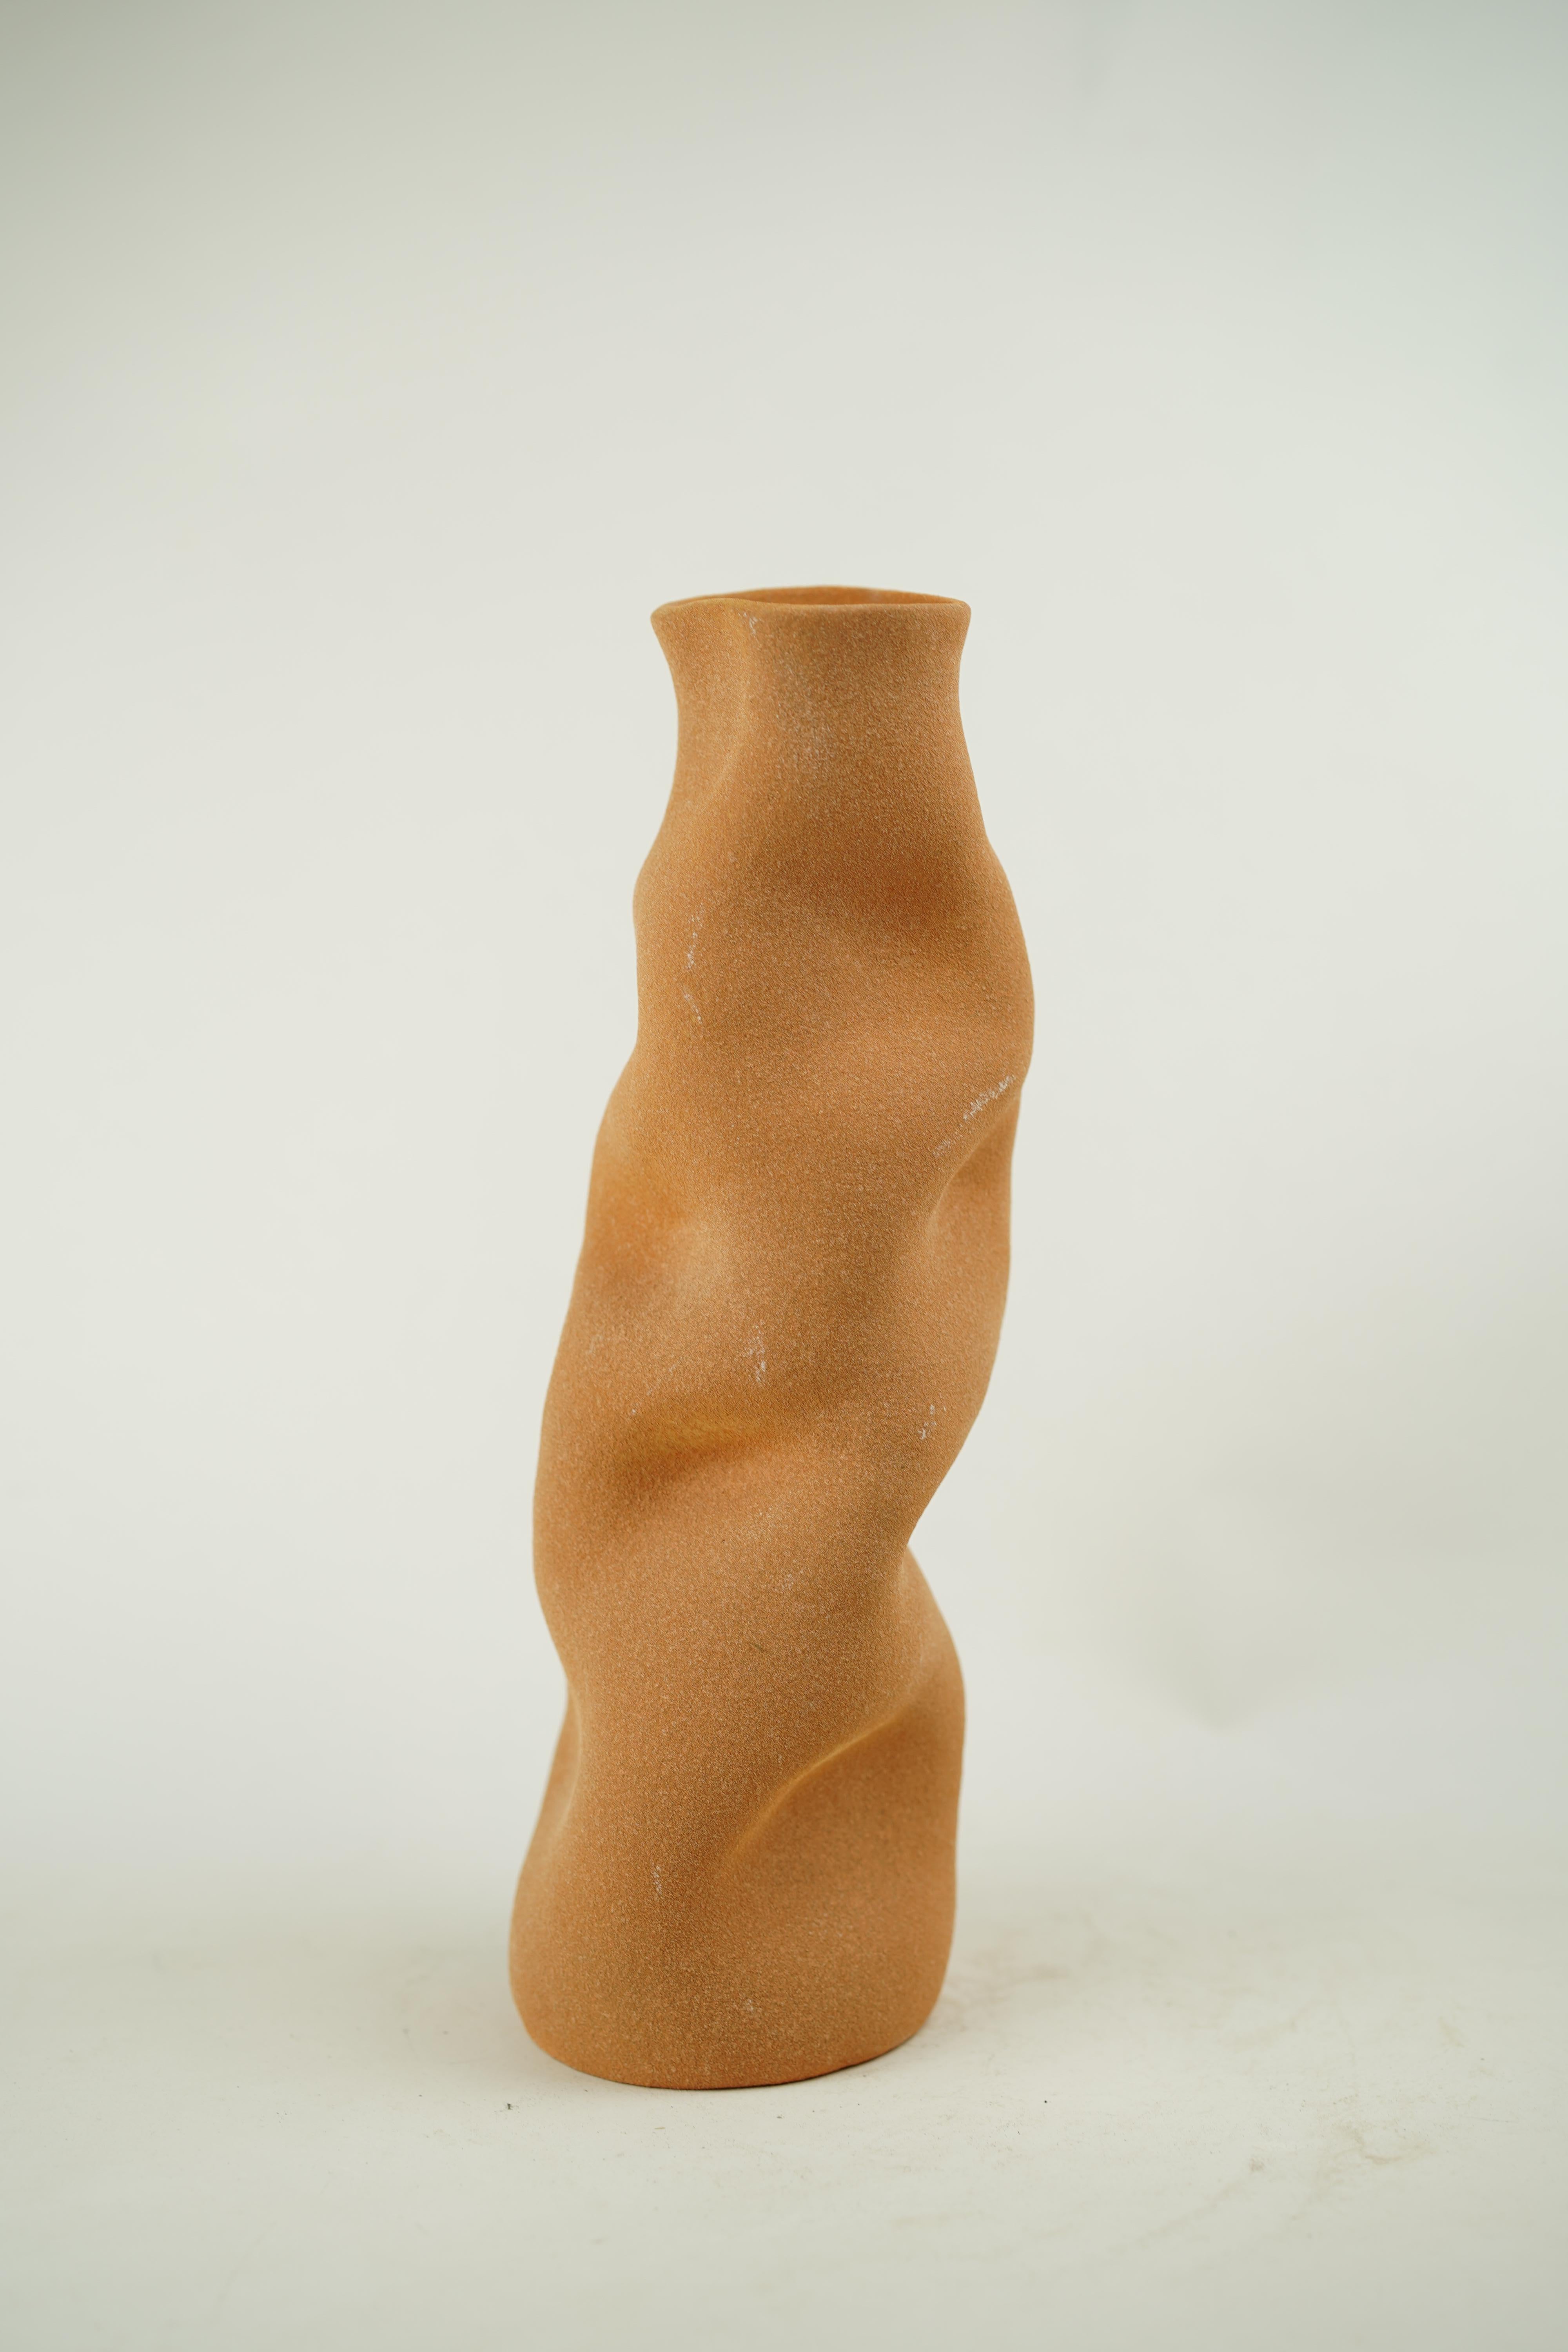 The Earthly Body vase series evokes silk softly billowing in the wind, the Earthly Body series is like a siren calling on you to touch its soft skin. Crafted using the colours found within nature, it reflects them outwards in their purest form like